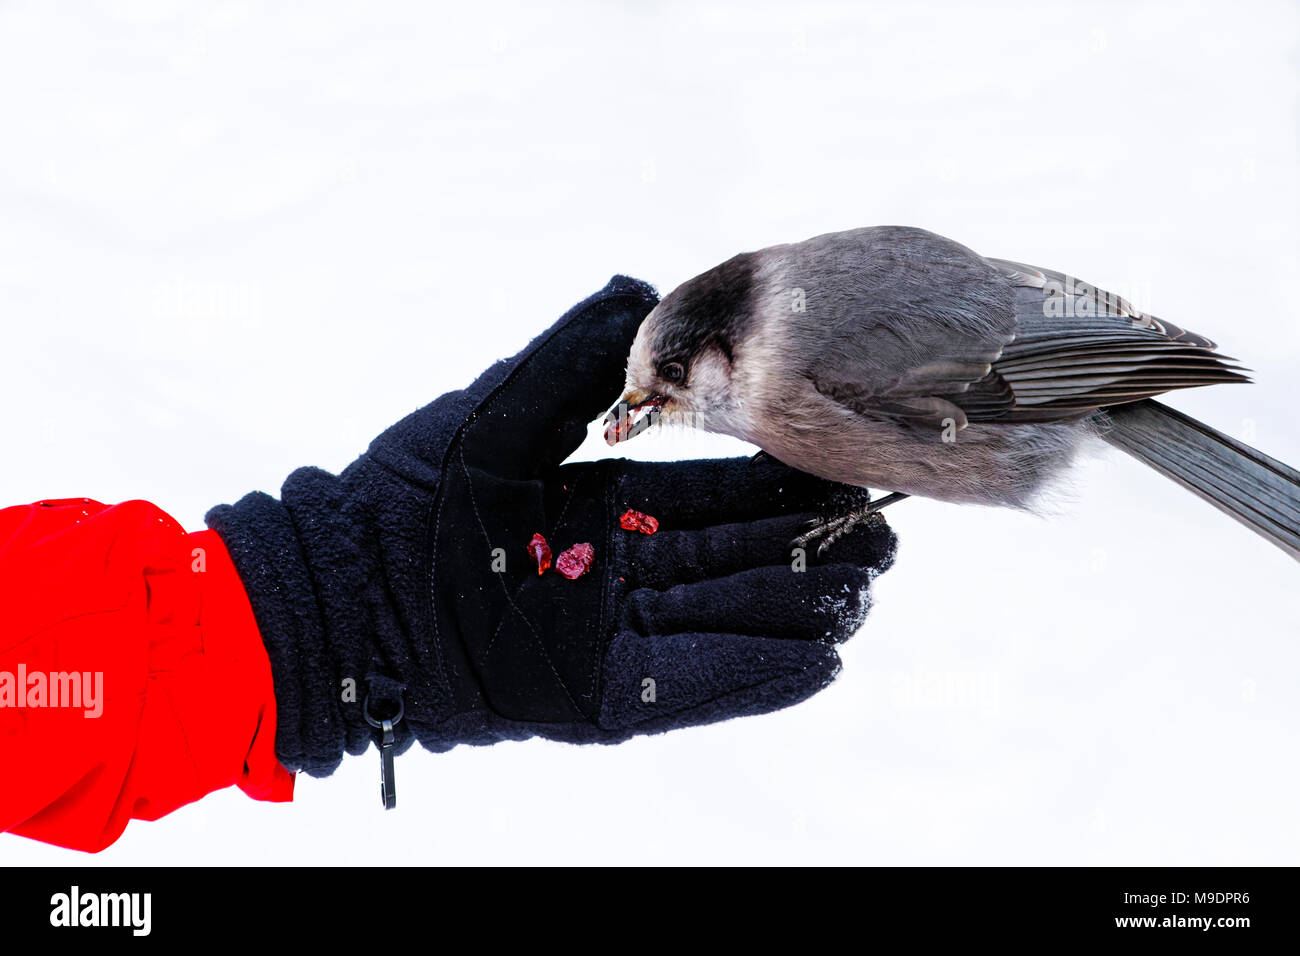 43,118.09166 close-up of Gray Jay, Canada jay eating cranberries out of a woman’s gloved hand; while she feeds the bird out of her hand Stock Photo